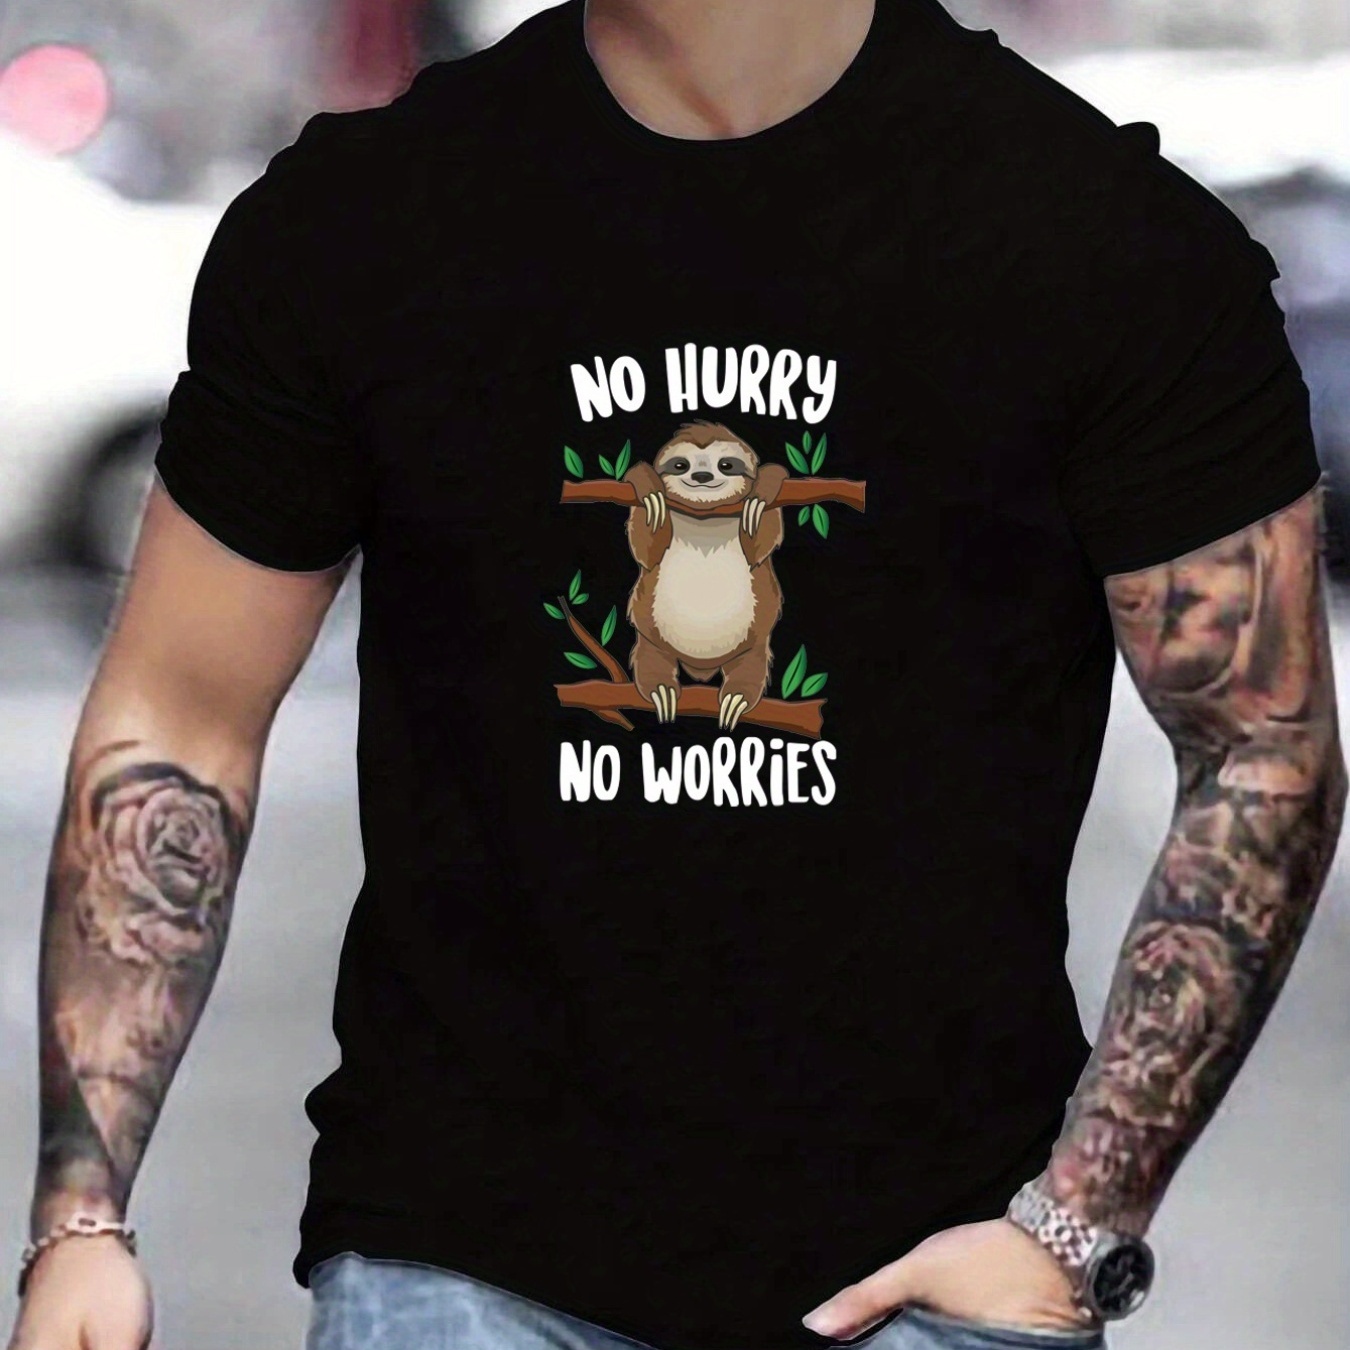 

'no Hurry No Worries' Koala Round Neck T-shirts, Causal Graphic Tees, Short Sleeves Slim Fit Tops, Men's Summer Clothing